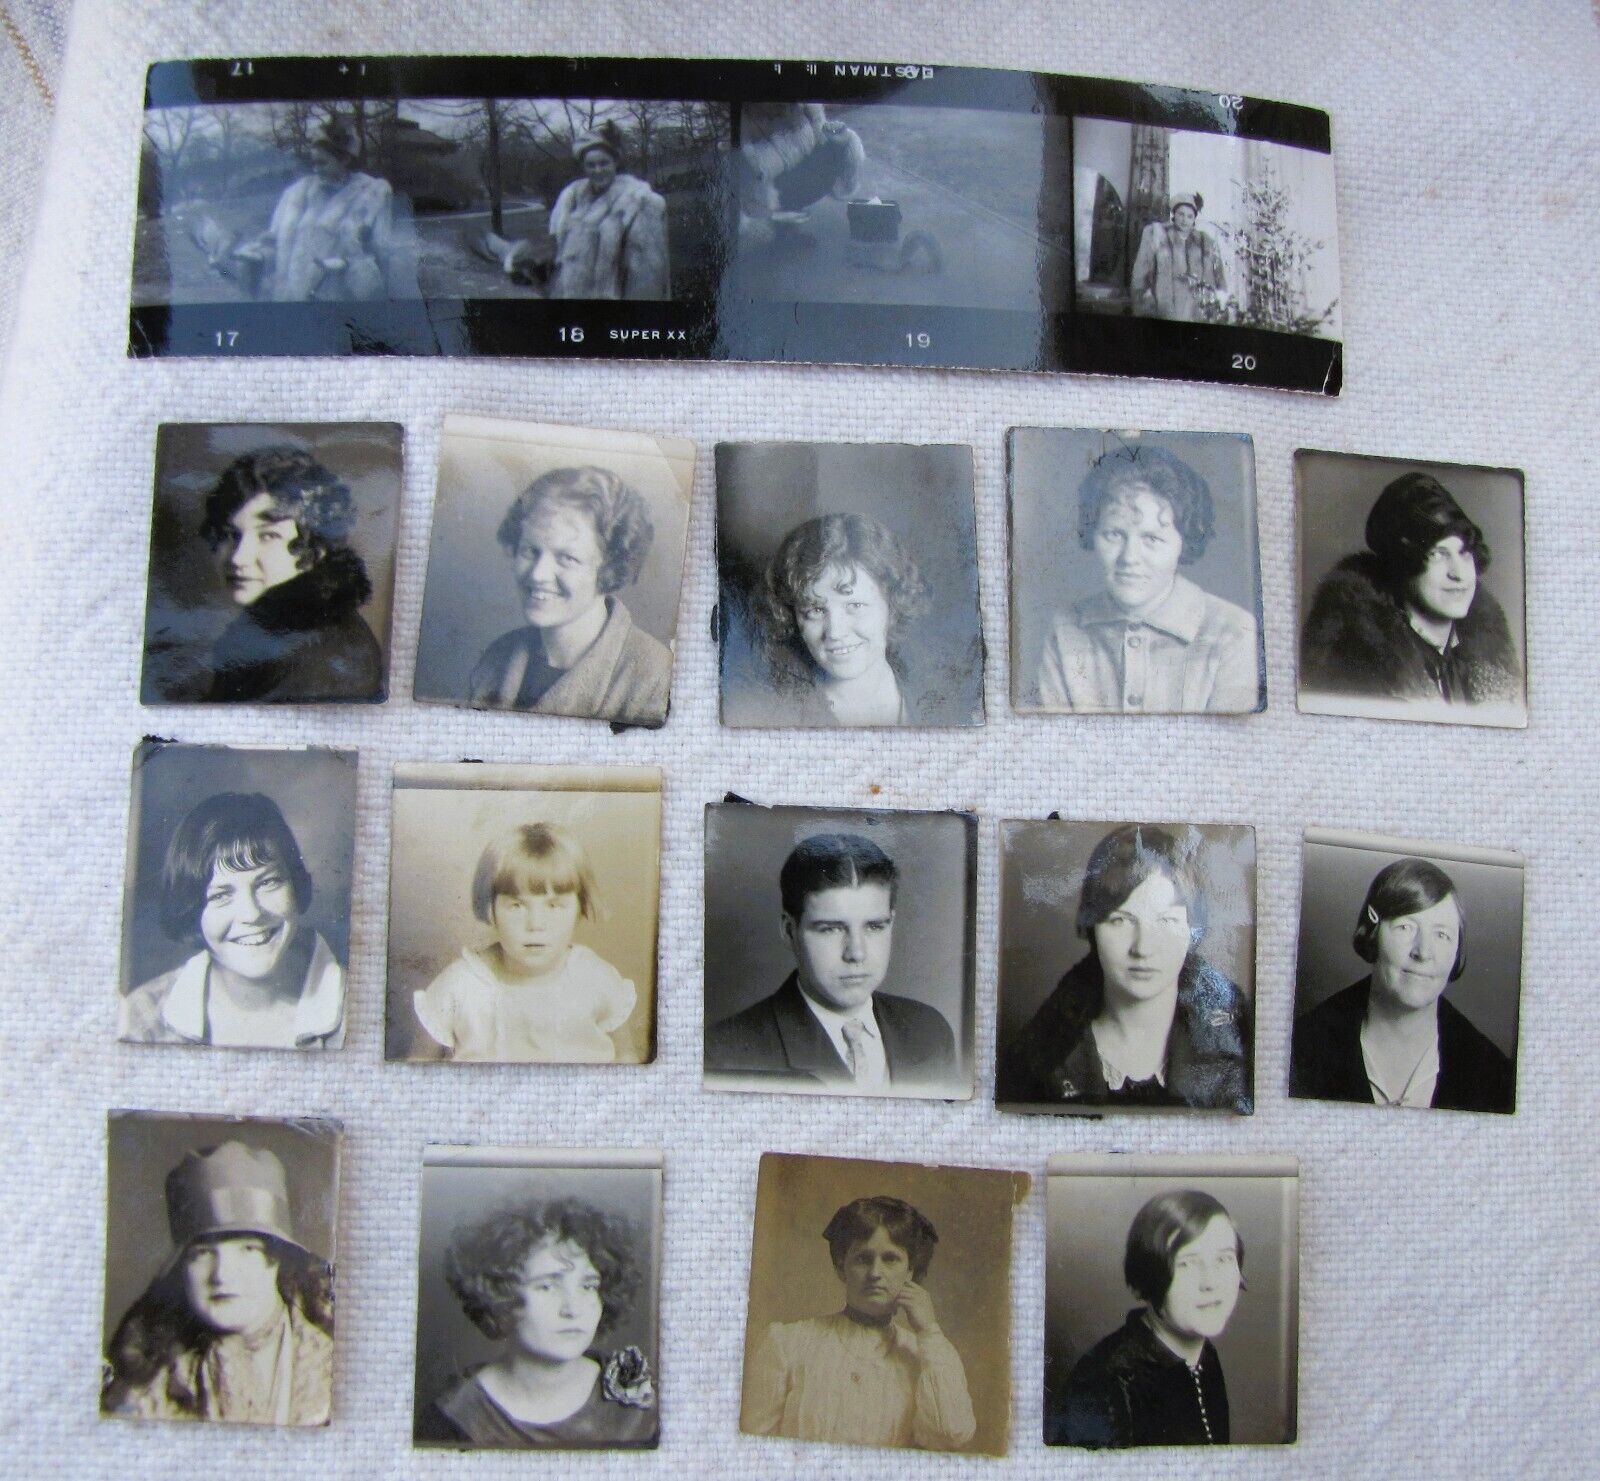 Vtg Antique Small Arcade Photo Booth Photos Lot of 14 + Photo Strip~Flappers